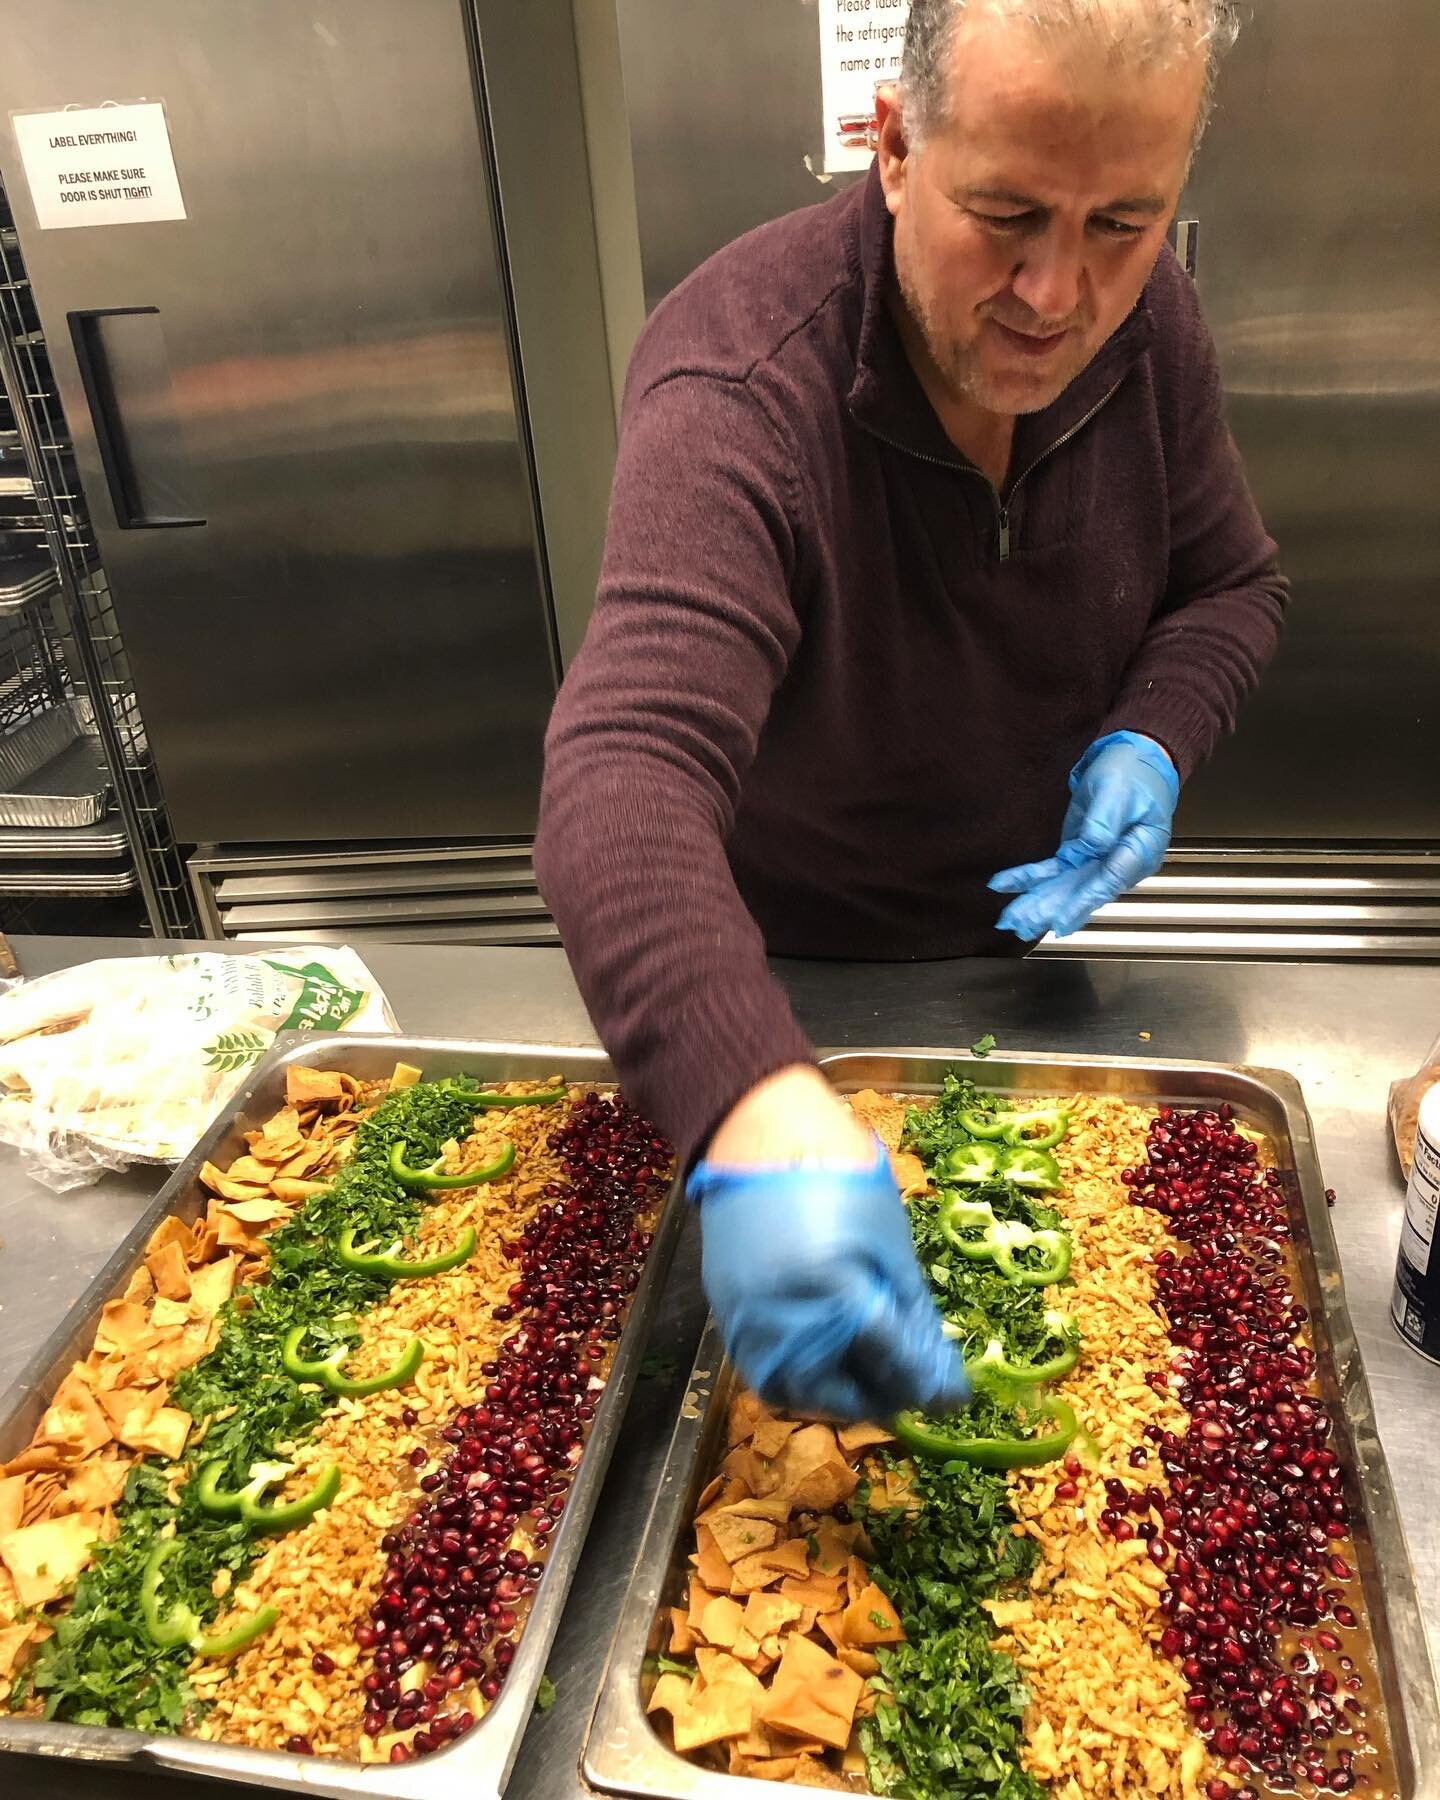 Did you know you can request your favorite Feast World Kitchen chef when you inquire about catering❓

👉🏻For example, if you want a Syrian Feast by Chef Nabil with his ornate platters providing lovely appetizers or meals at your business event&helli